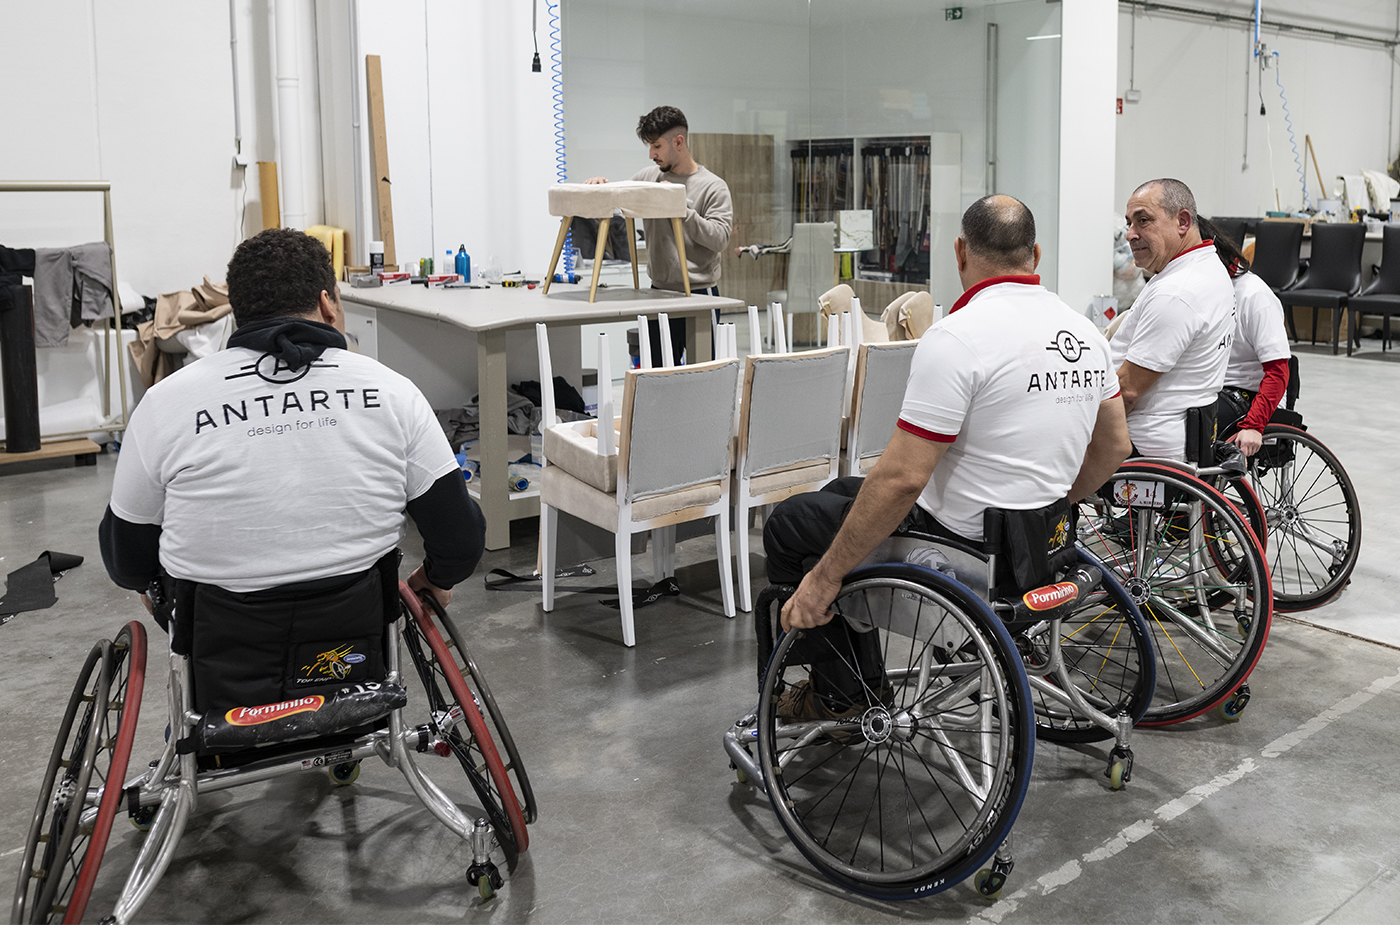 Antarte sponsors the Portuguese Association of the Handicapped of Paredes